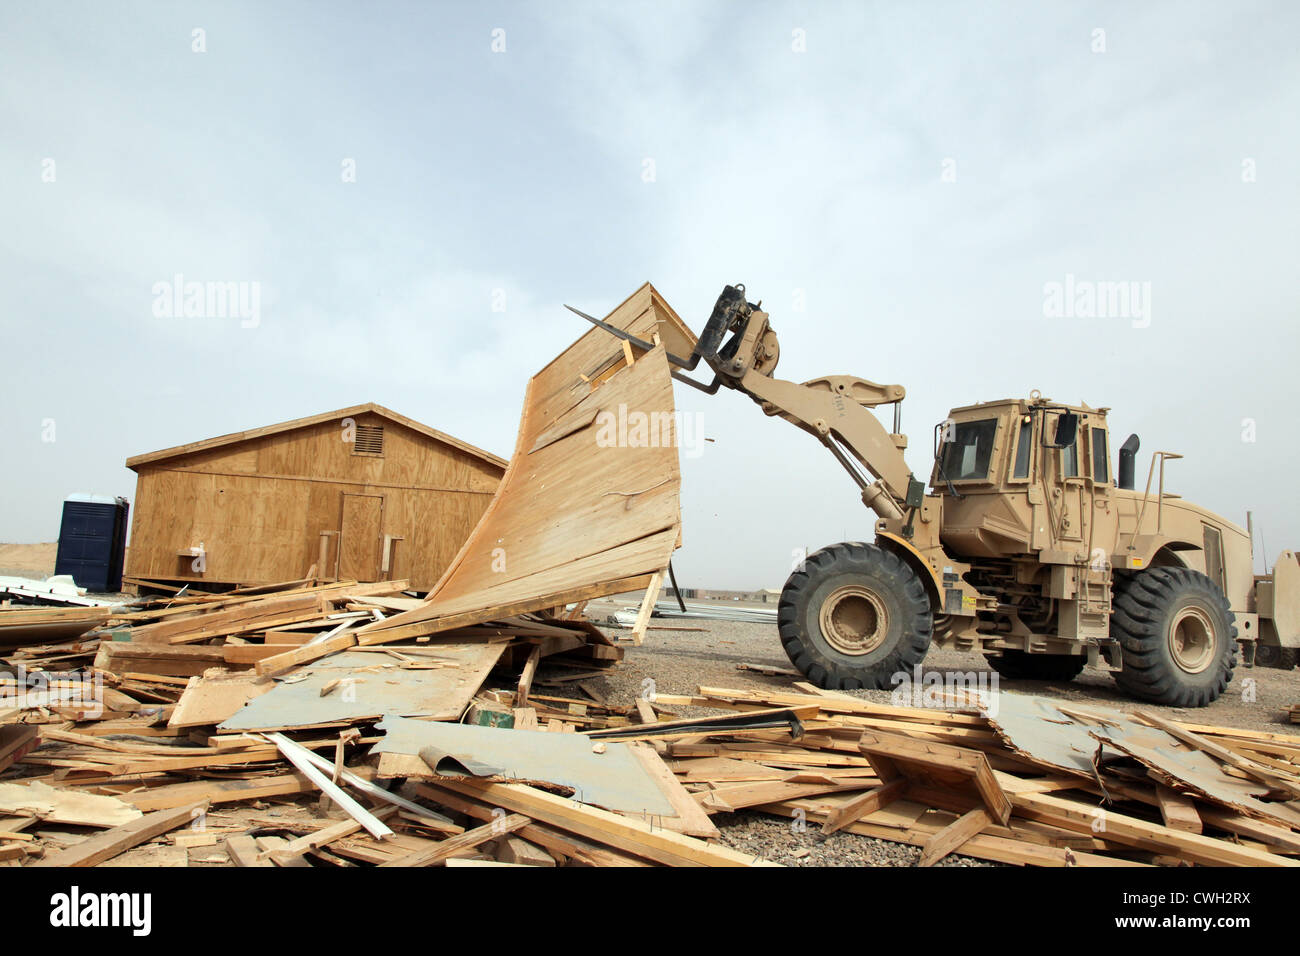 The US Army operates an Armored Combat Engineer Front Loader to demolish a wooden building on Camp Delaram II, Nimroz province, Afghanistan May 15, 2012. Soldiers demolished the building as part of the demilitarization process of the Camp. Stock Photo